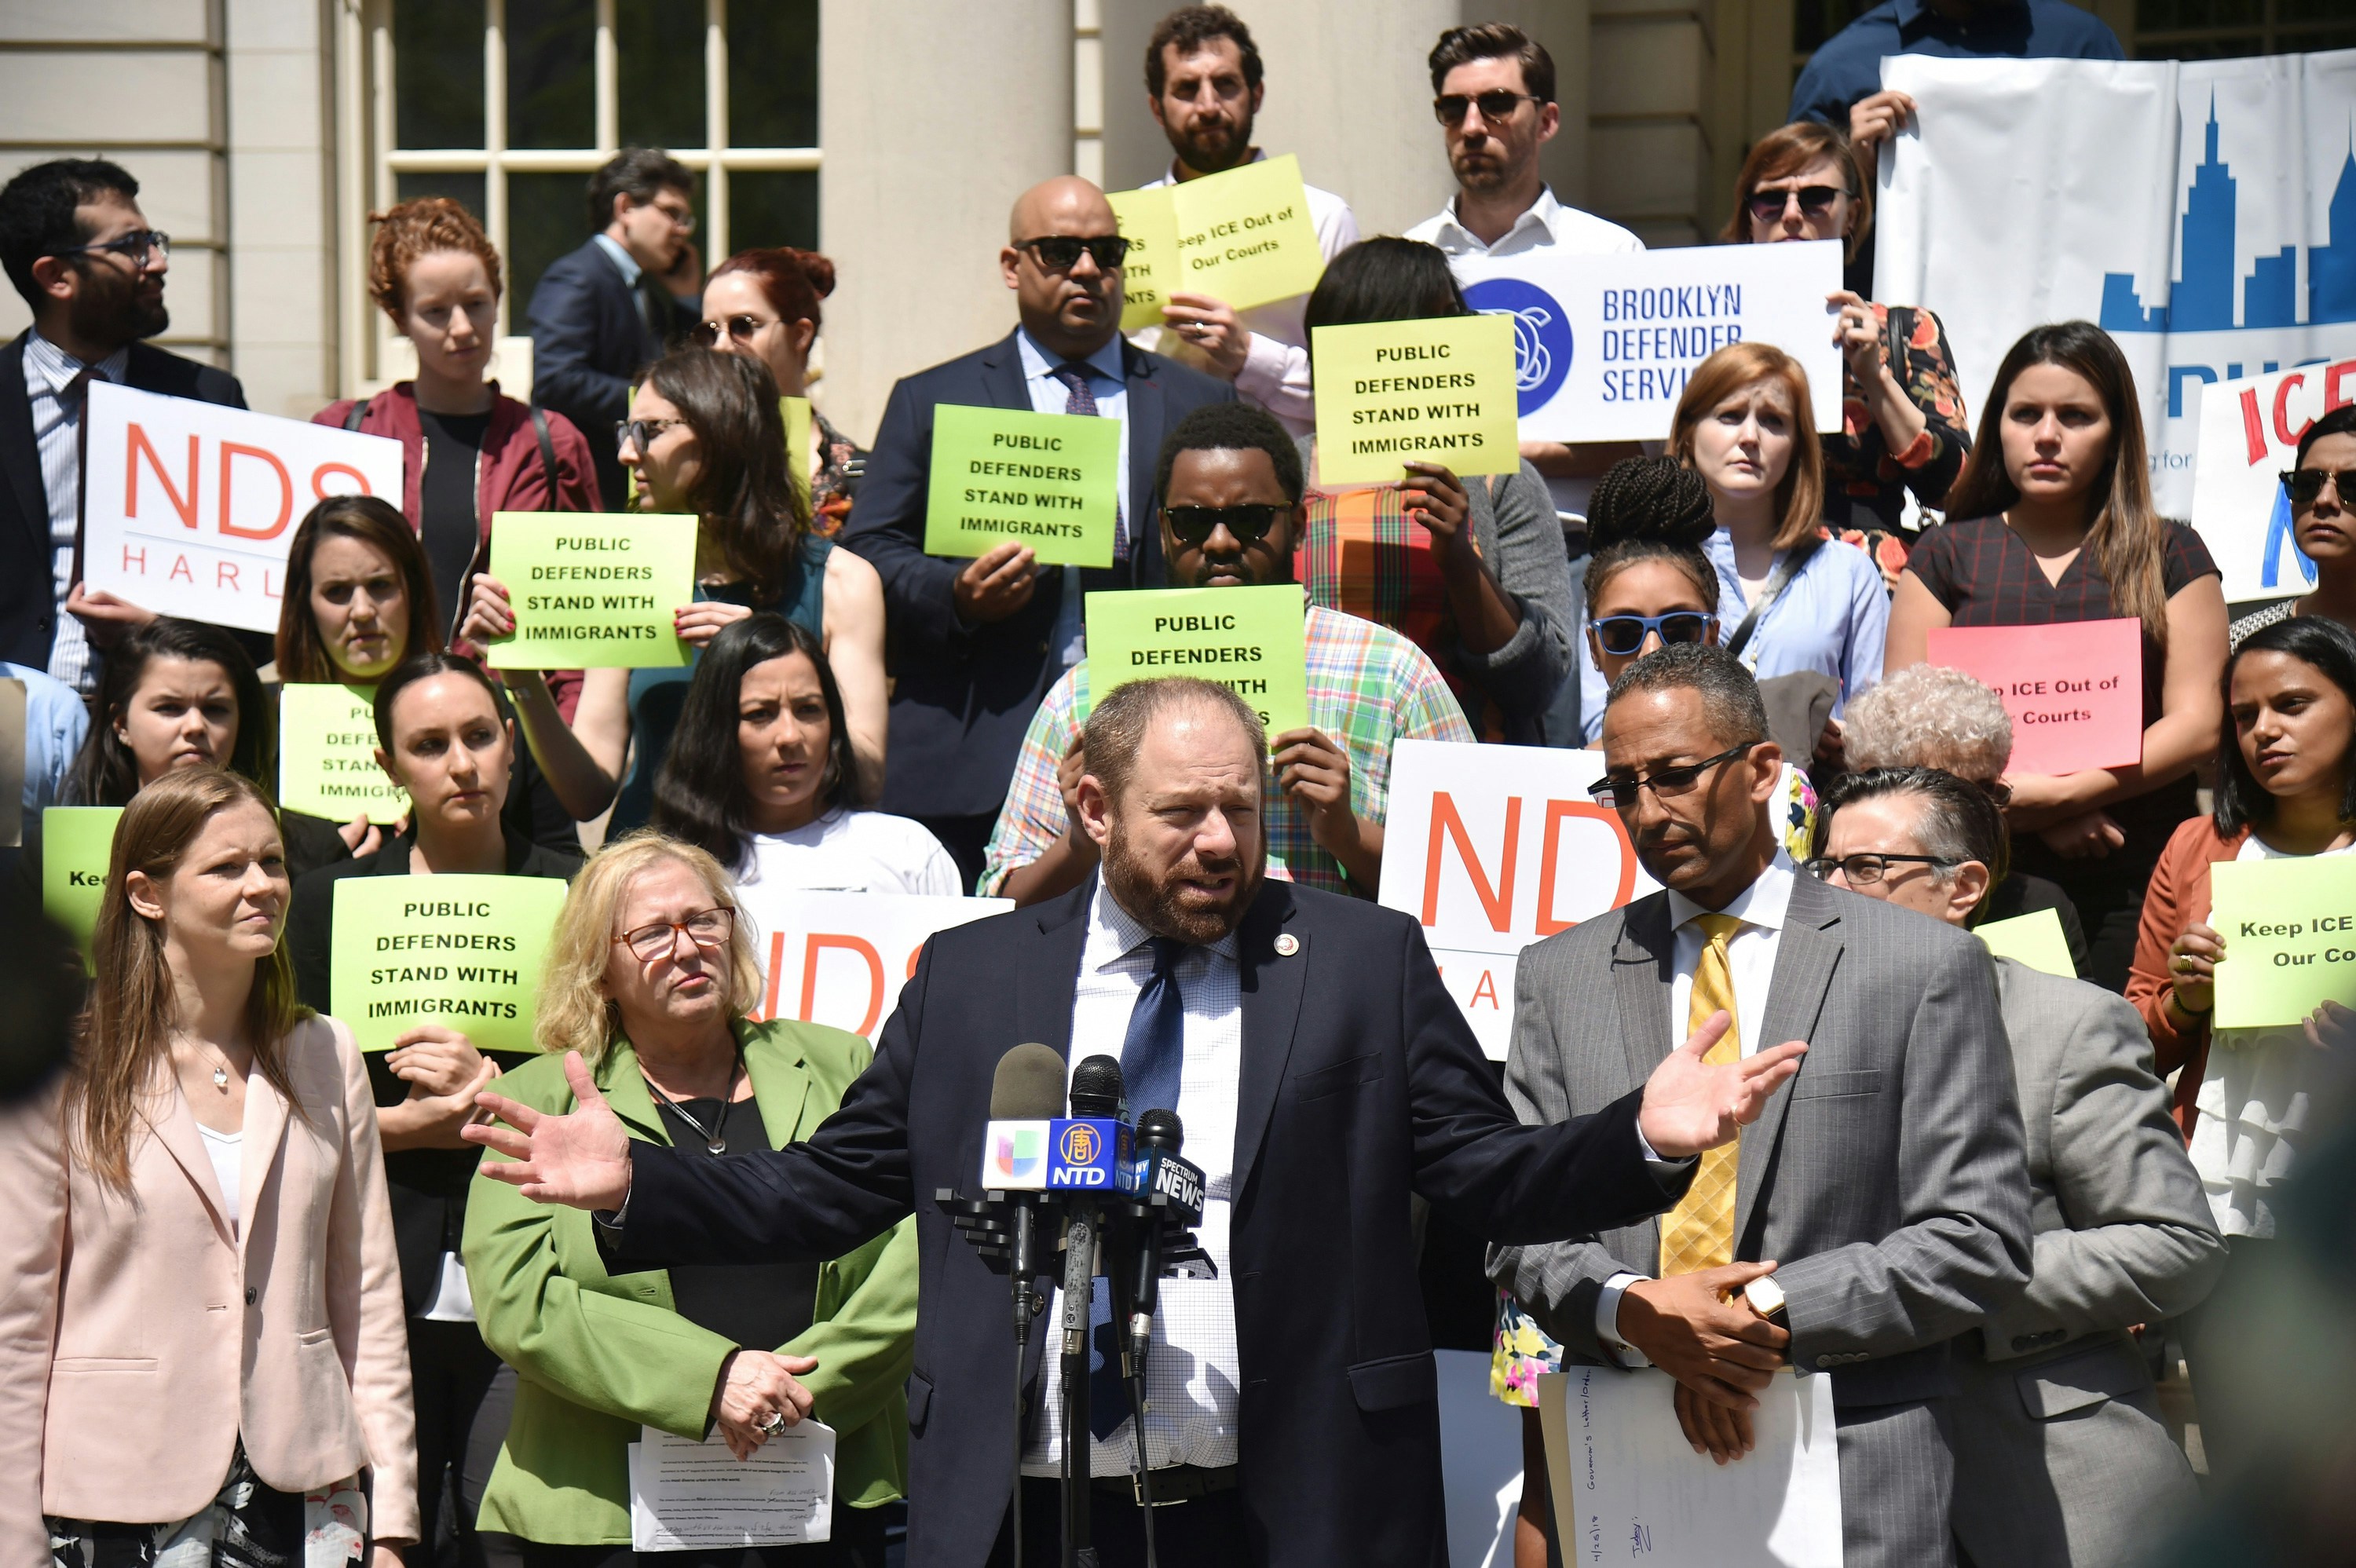 New York City council member Rory Lancman surounded by public defenders and advocates give a press conference to demand to the Chief judge DiFiore to prohibit ICE arrests in all courthouses, except when authorized by a judicial warrant, in New York, on May 9, 2018. (Photo by HECTOR RETAMAL / AFP)(Photo credit should read HECTOR RETAMAL/AFP/Getty Images)